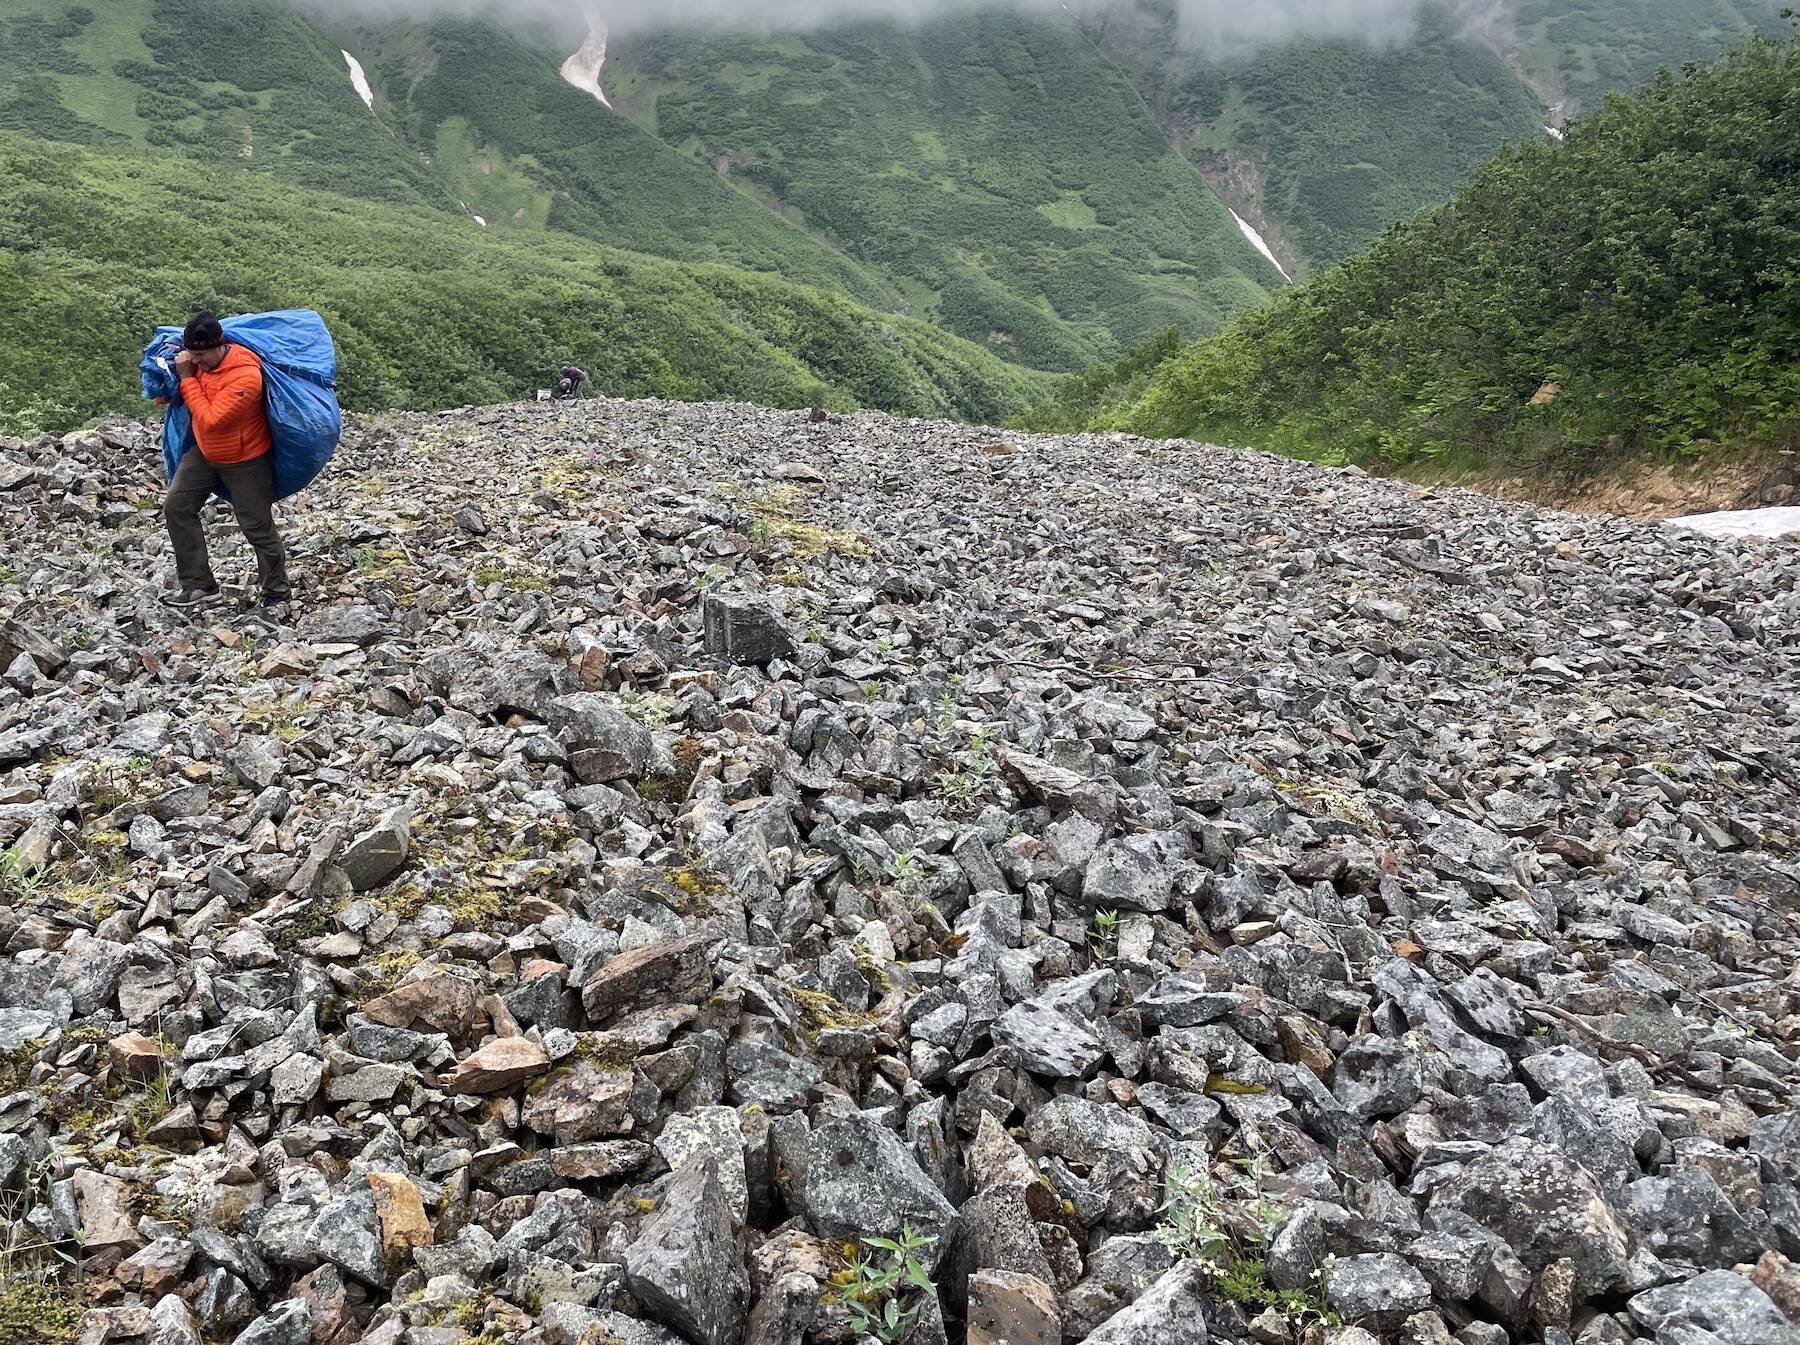 Adam Bucki hauls a load of trash from Fireweed rock glacier to the site where a helicopter will pick it up and haul it back to nearby McCarthy. He would later dispose of the trash in a sanitary landfill. (Photo by Ned Rozell)